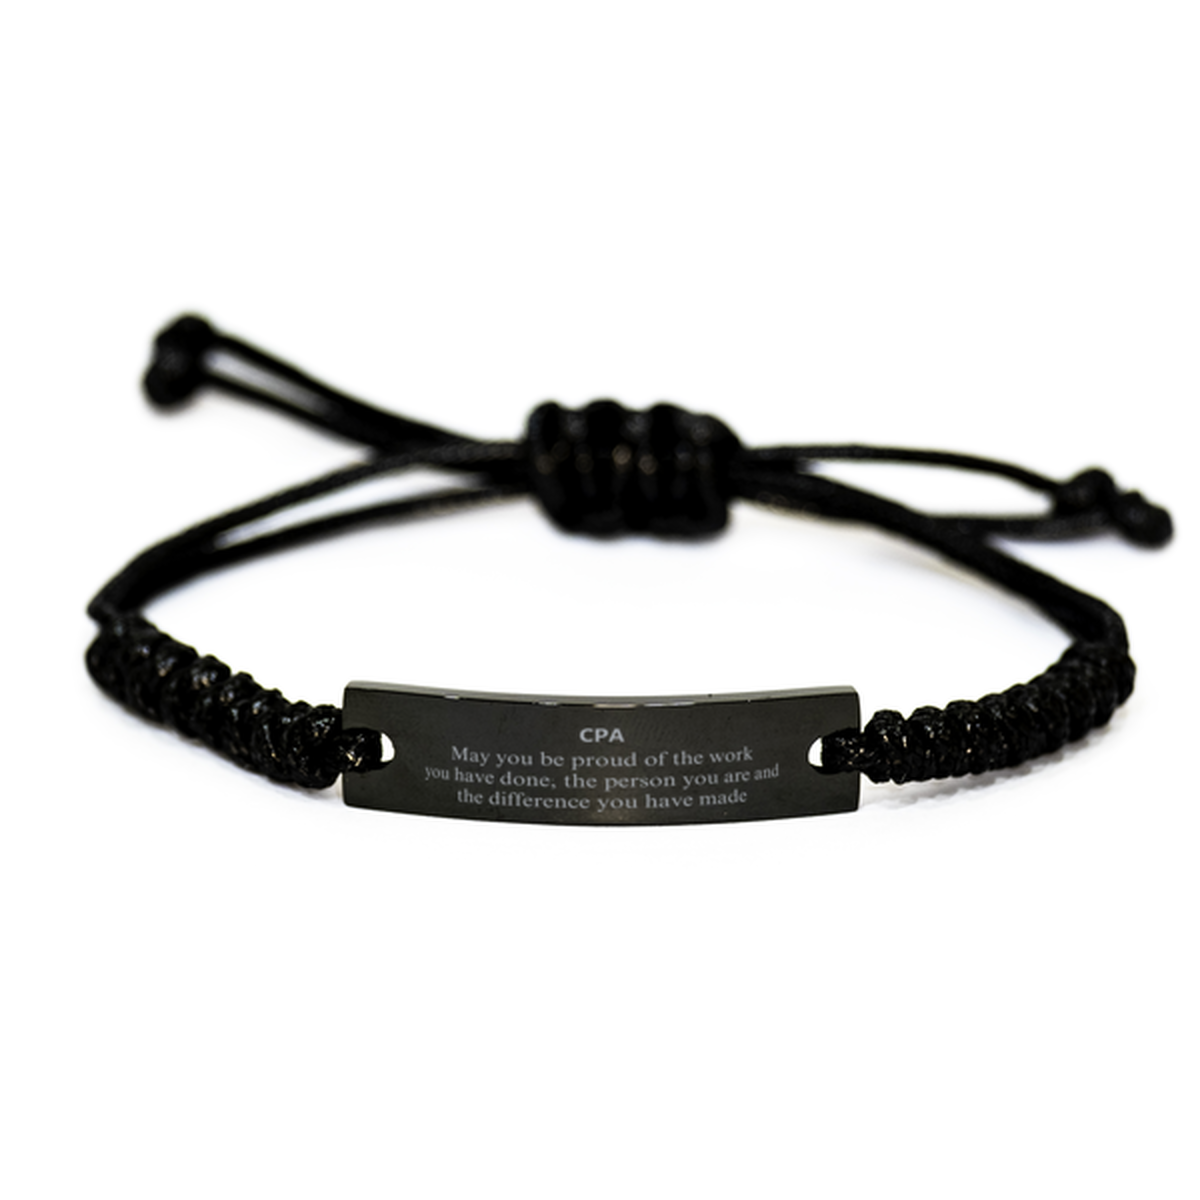 CPA May you be proud of the work you have done, Retirement CPA Black Rope Bracelet for Colleague Appreciation Gifts Amazing for CPA